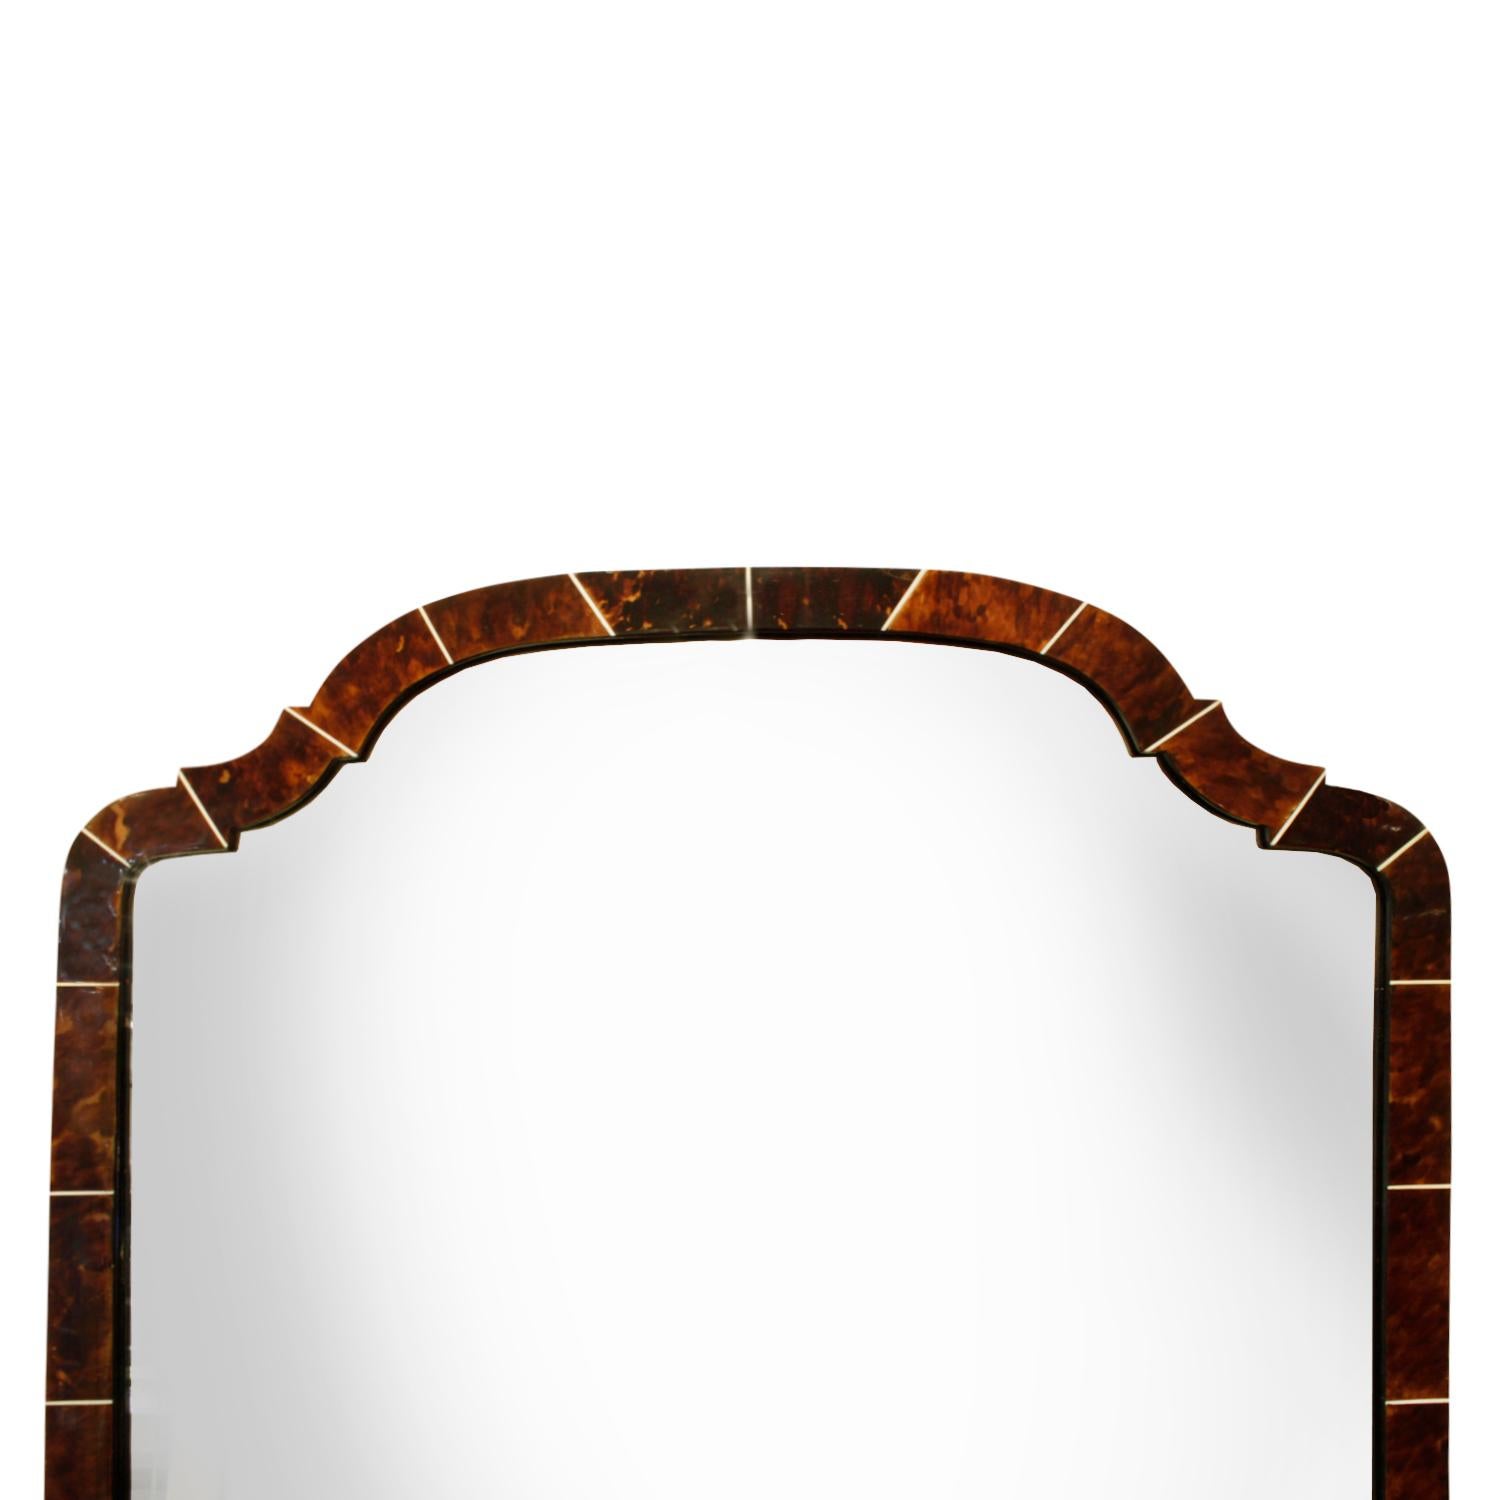 Hand-Crafted French Mirror in Tortoise Shell with Bone Inlays, 1930s